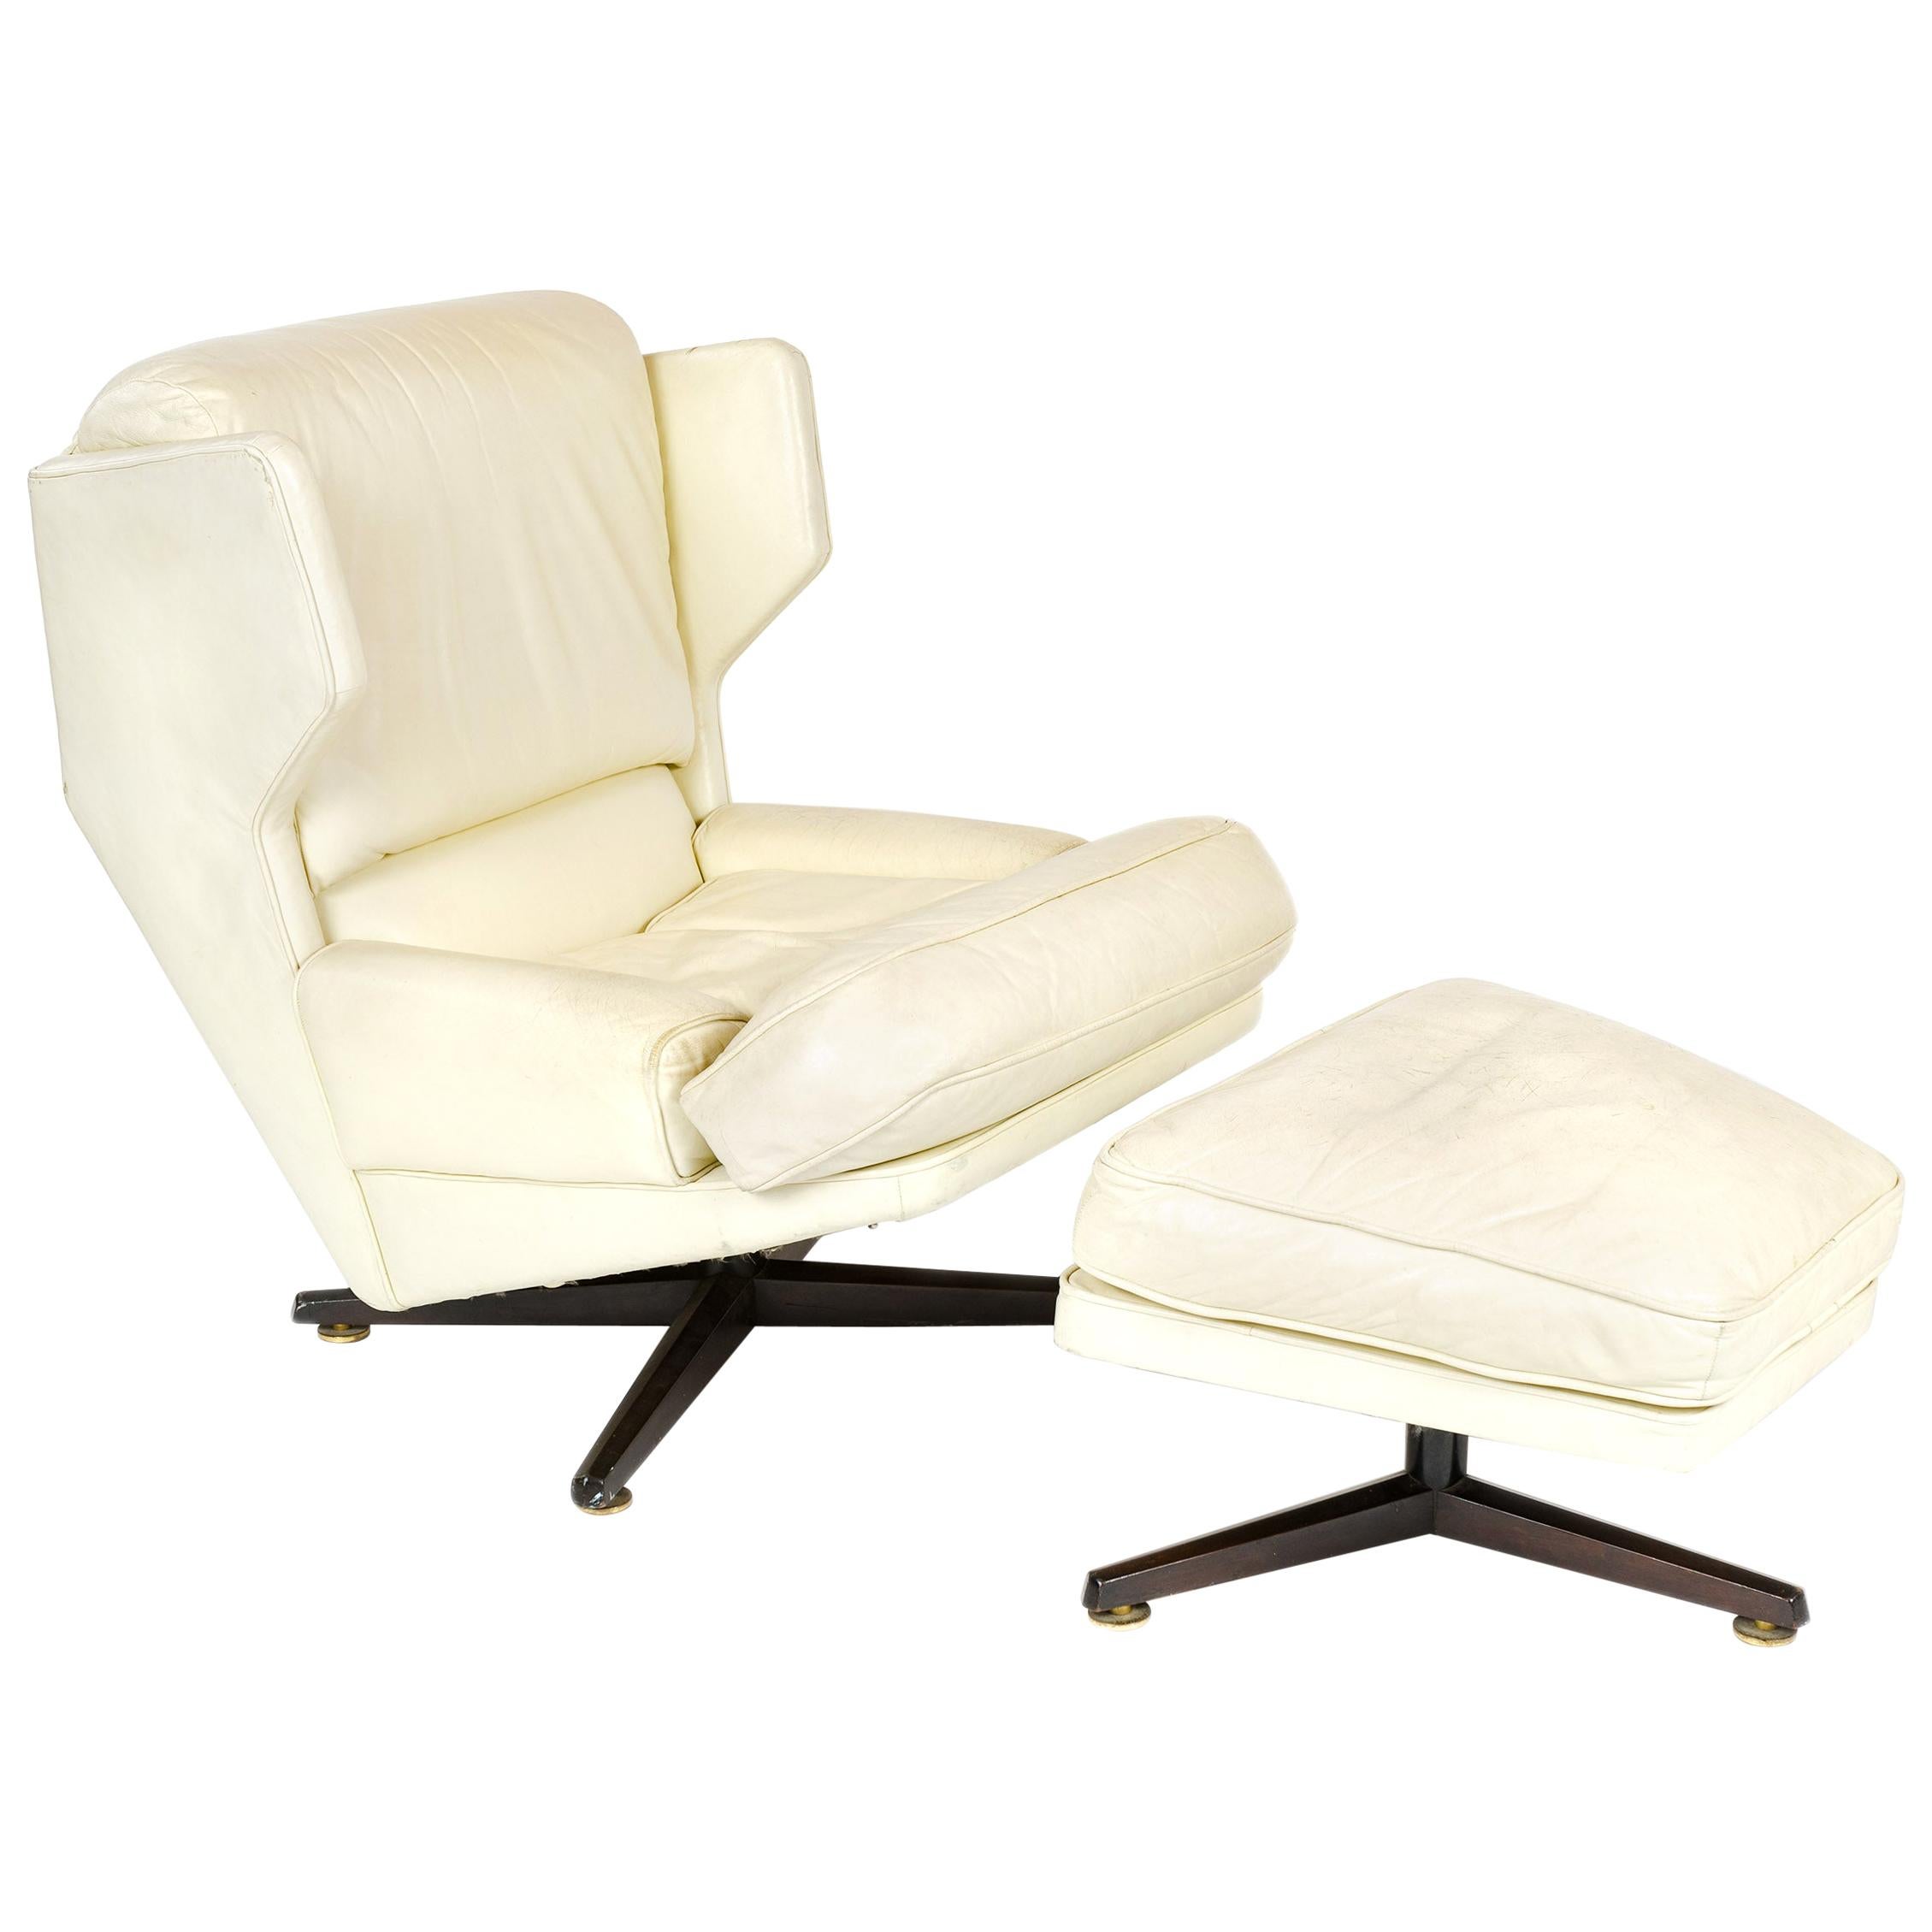 1960s Leather Lounge Chair and Ottoman by Edward Wormley for Dunbar